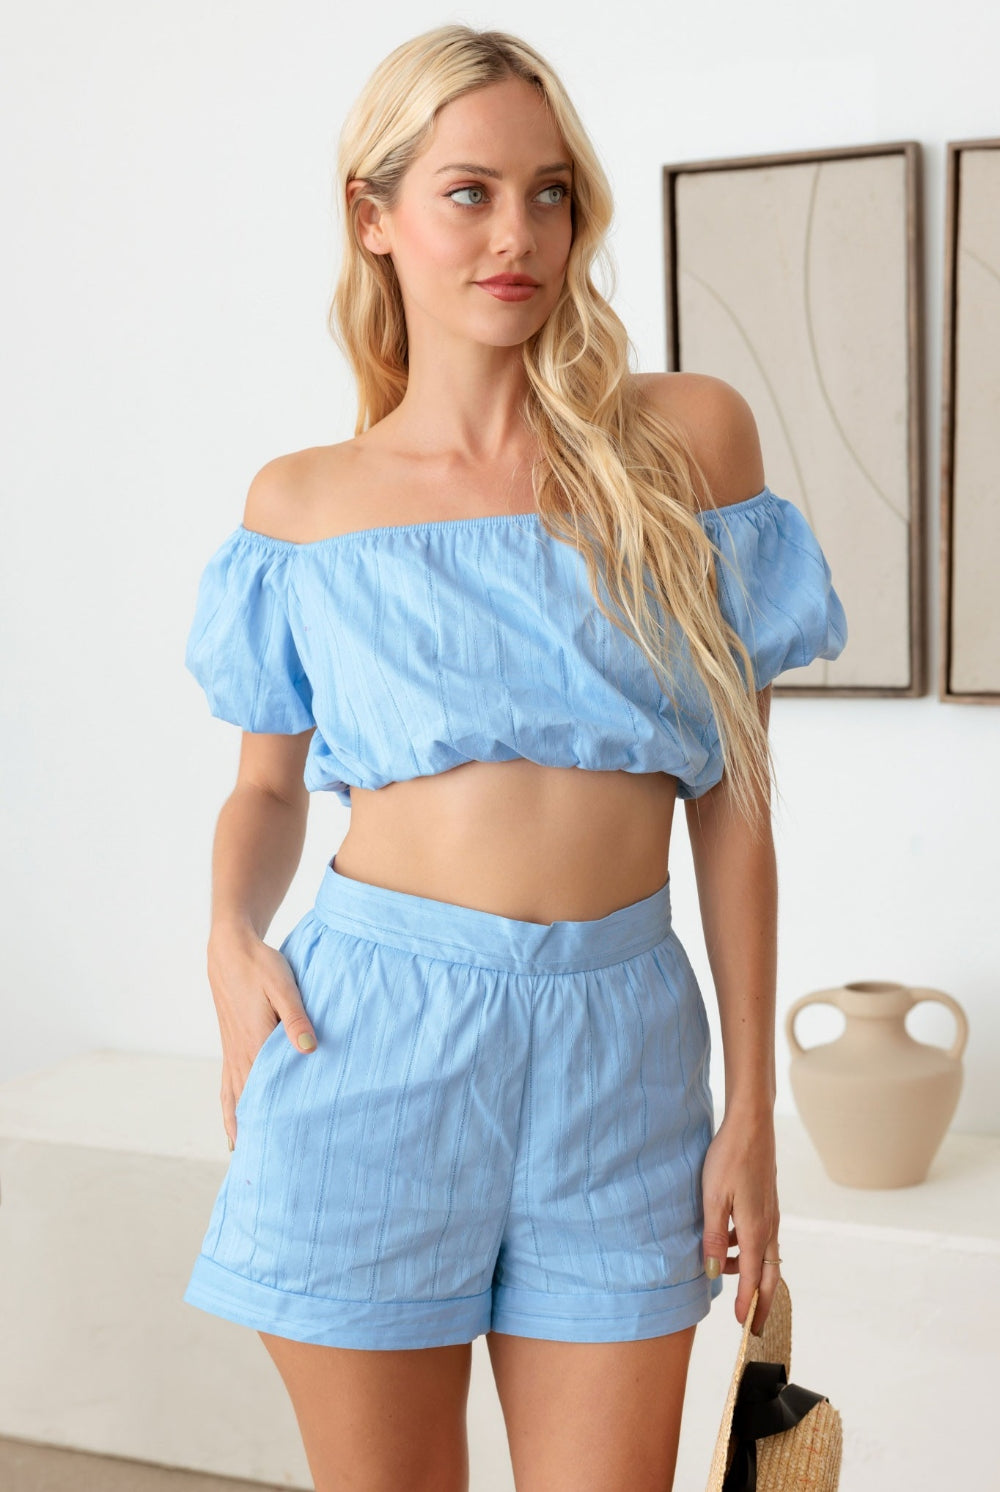 A woman wearing a sky blue off-shoulder crop top with matching shorts, creating a cohesive and stylish summer outfit.